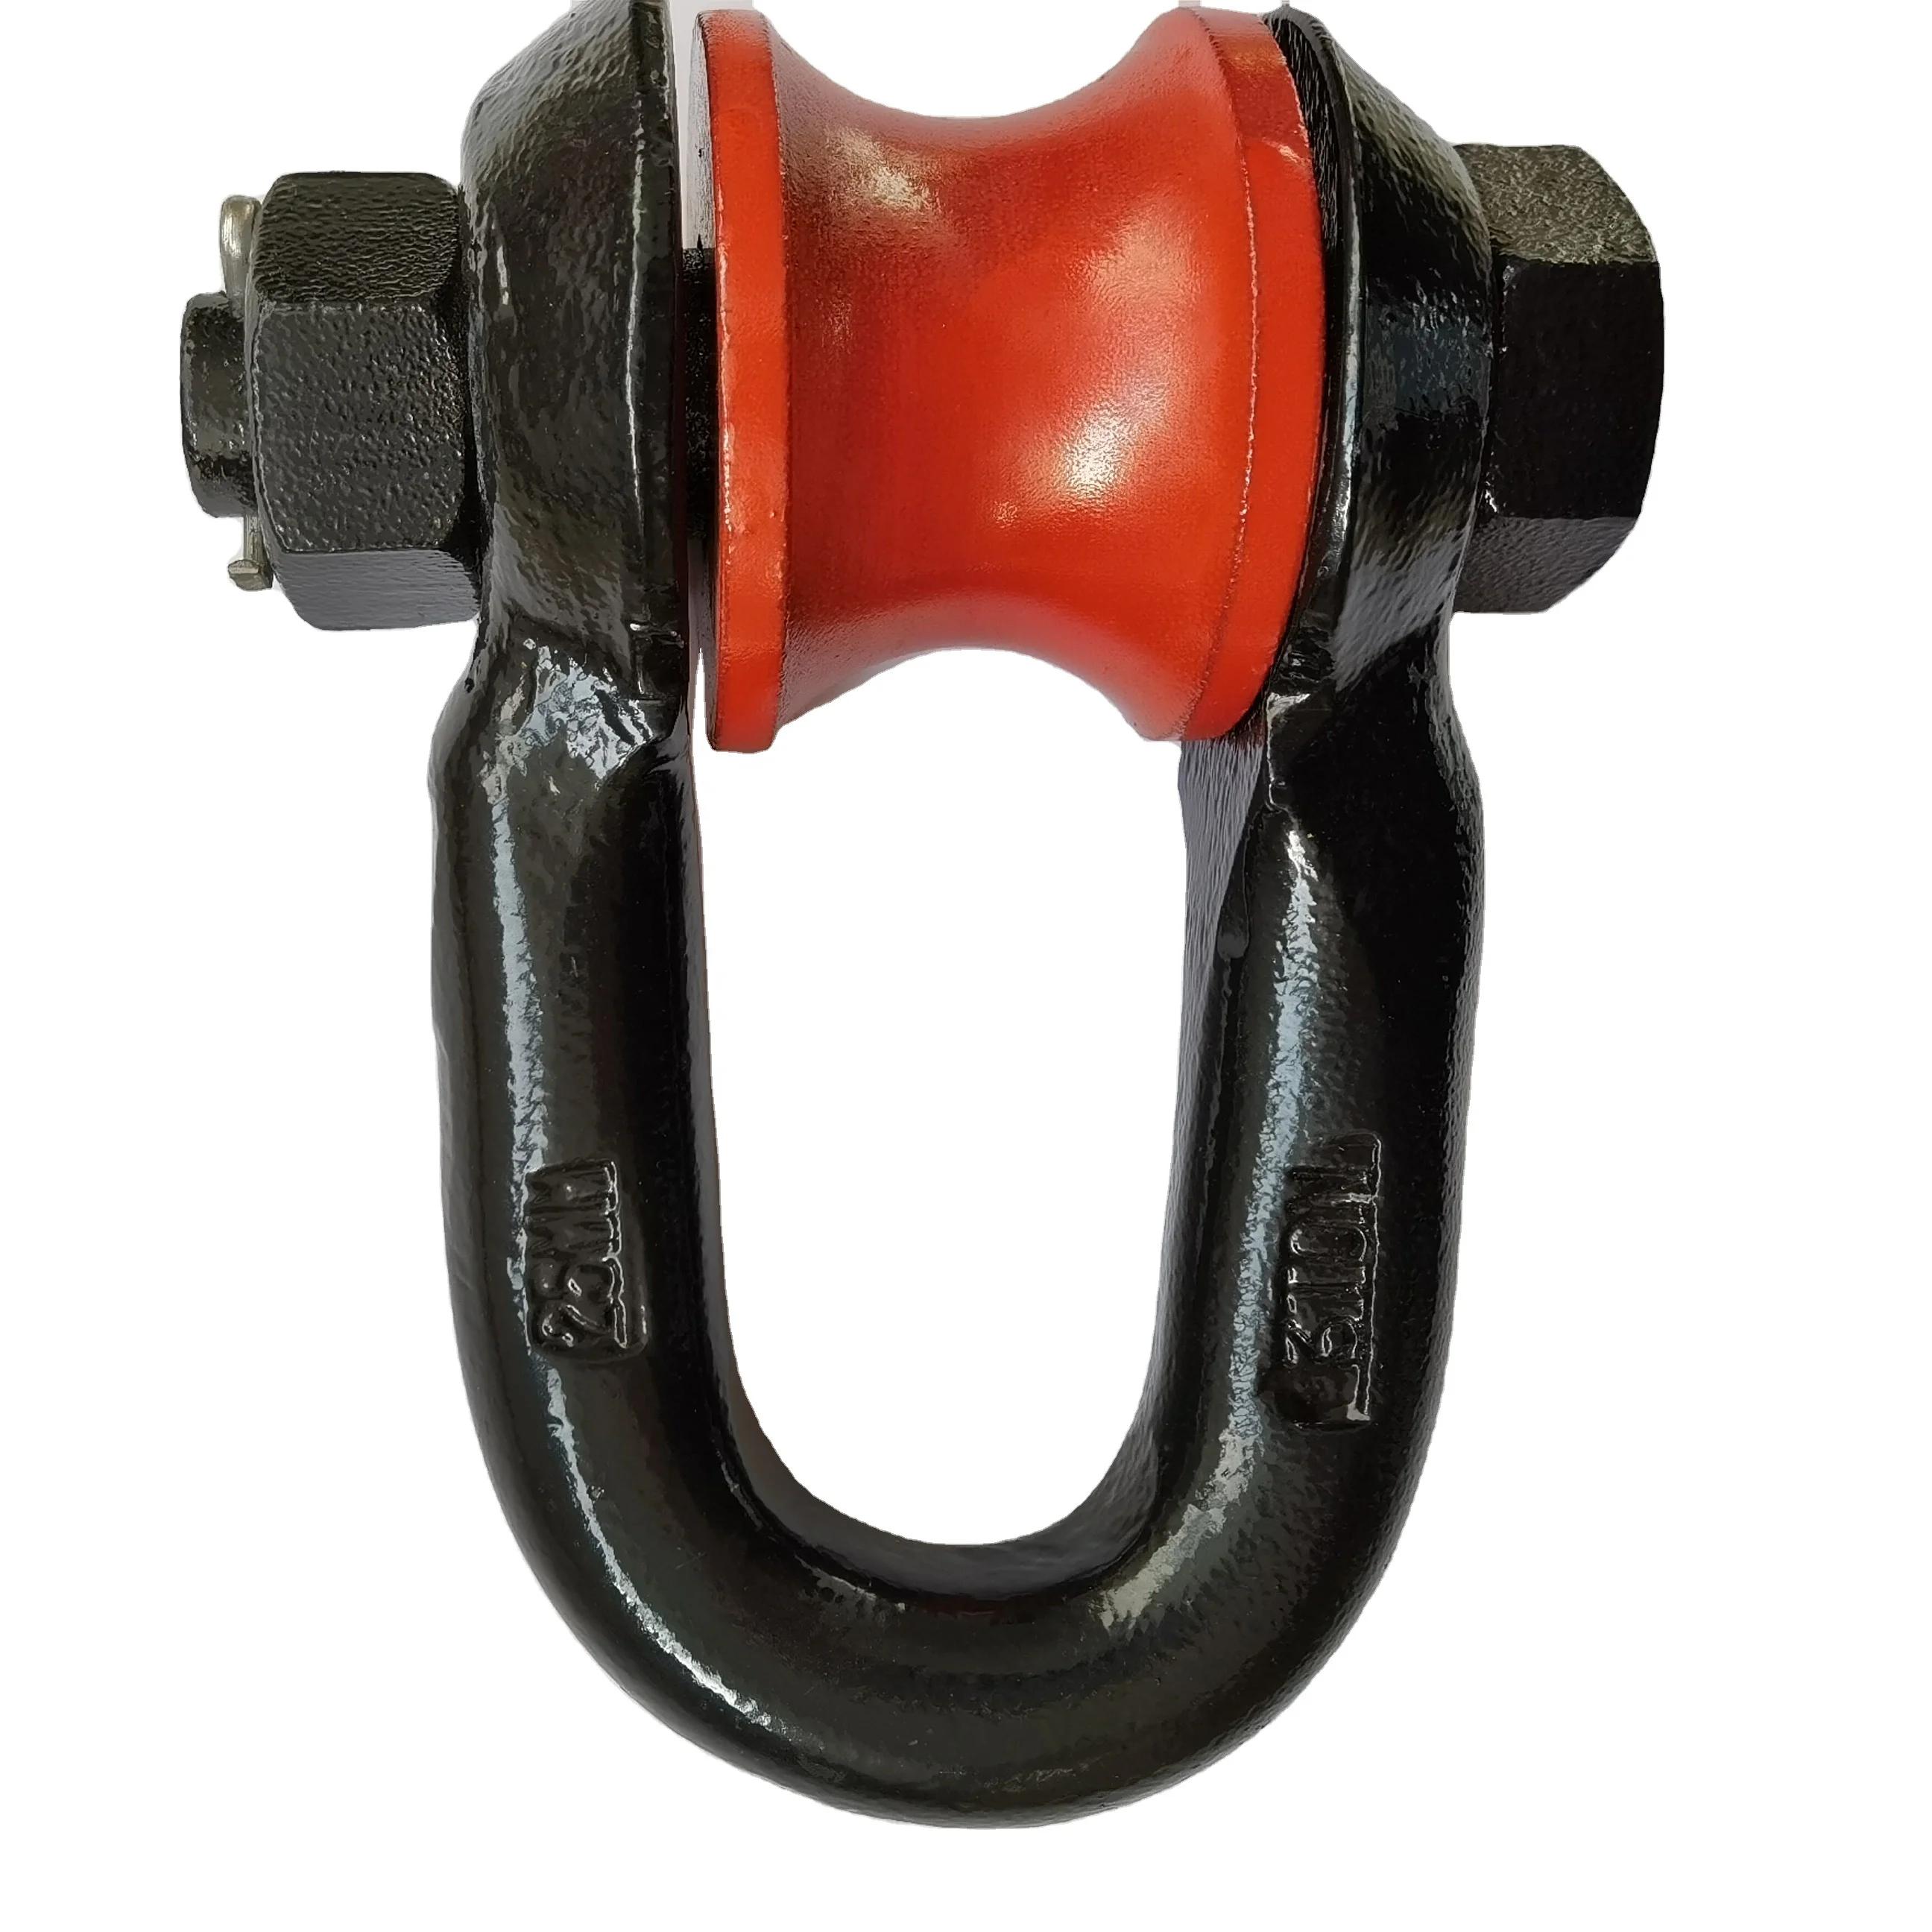 Lifting shackle rollers